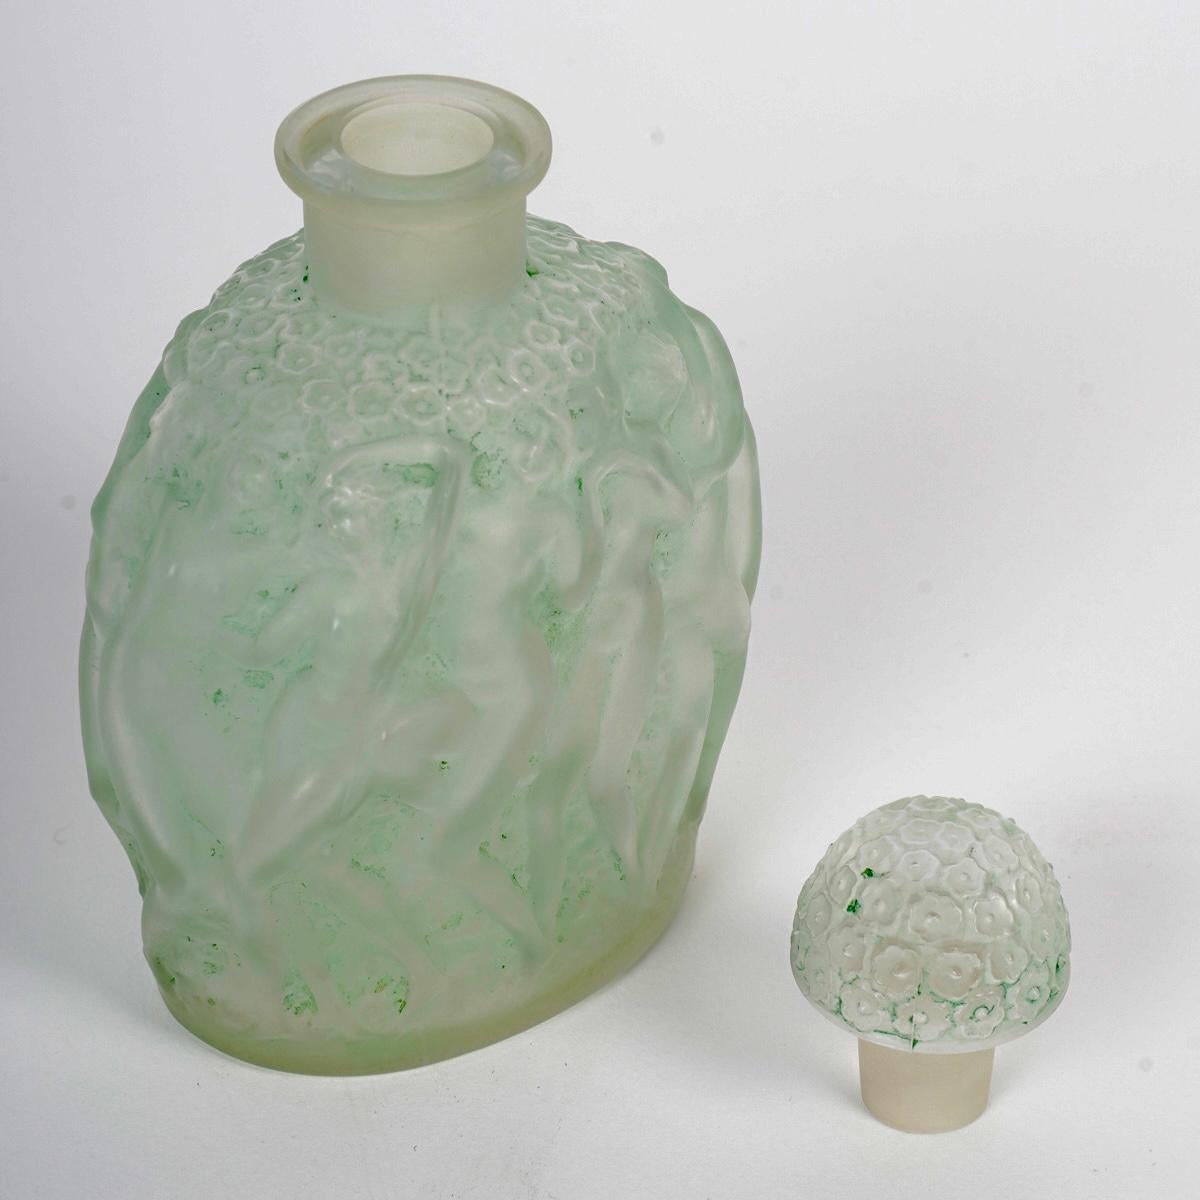 Art Deco 1937 Rene Lalique Perfume Bottle Calendal for Molinard Glass with Green Patina For Sale